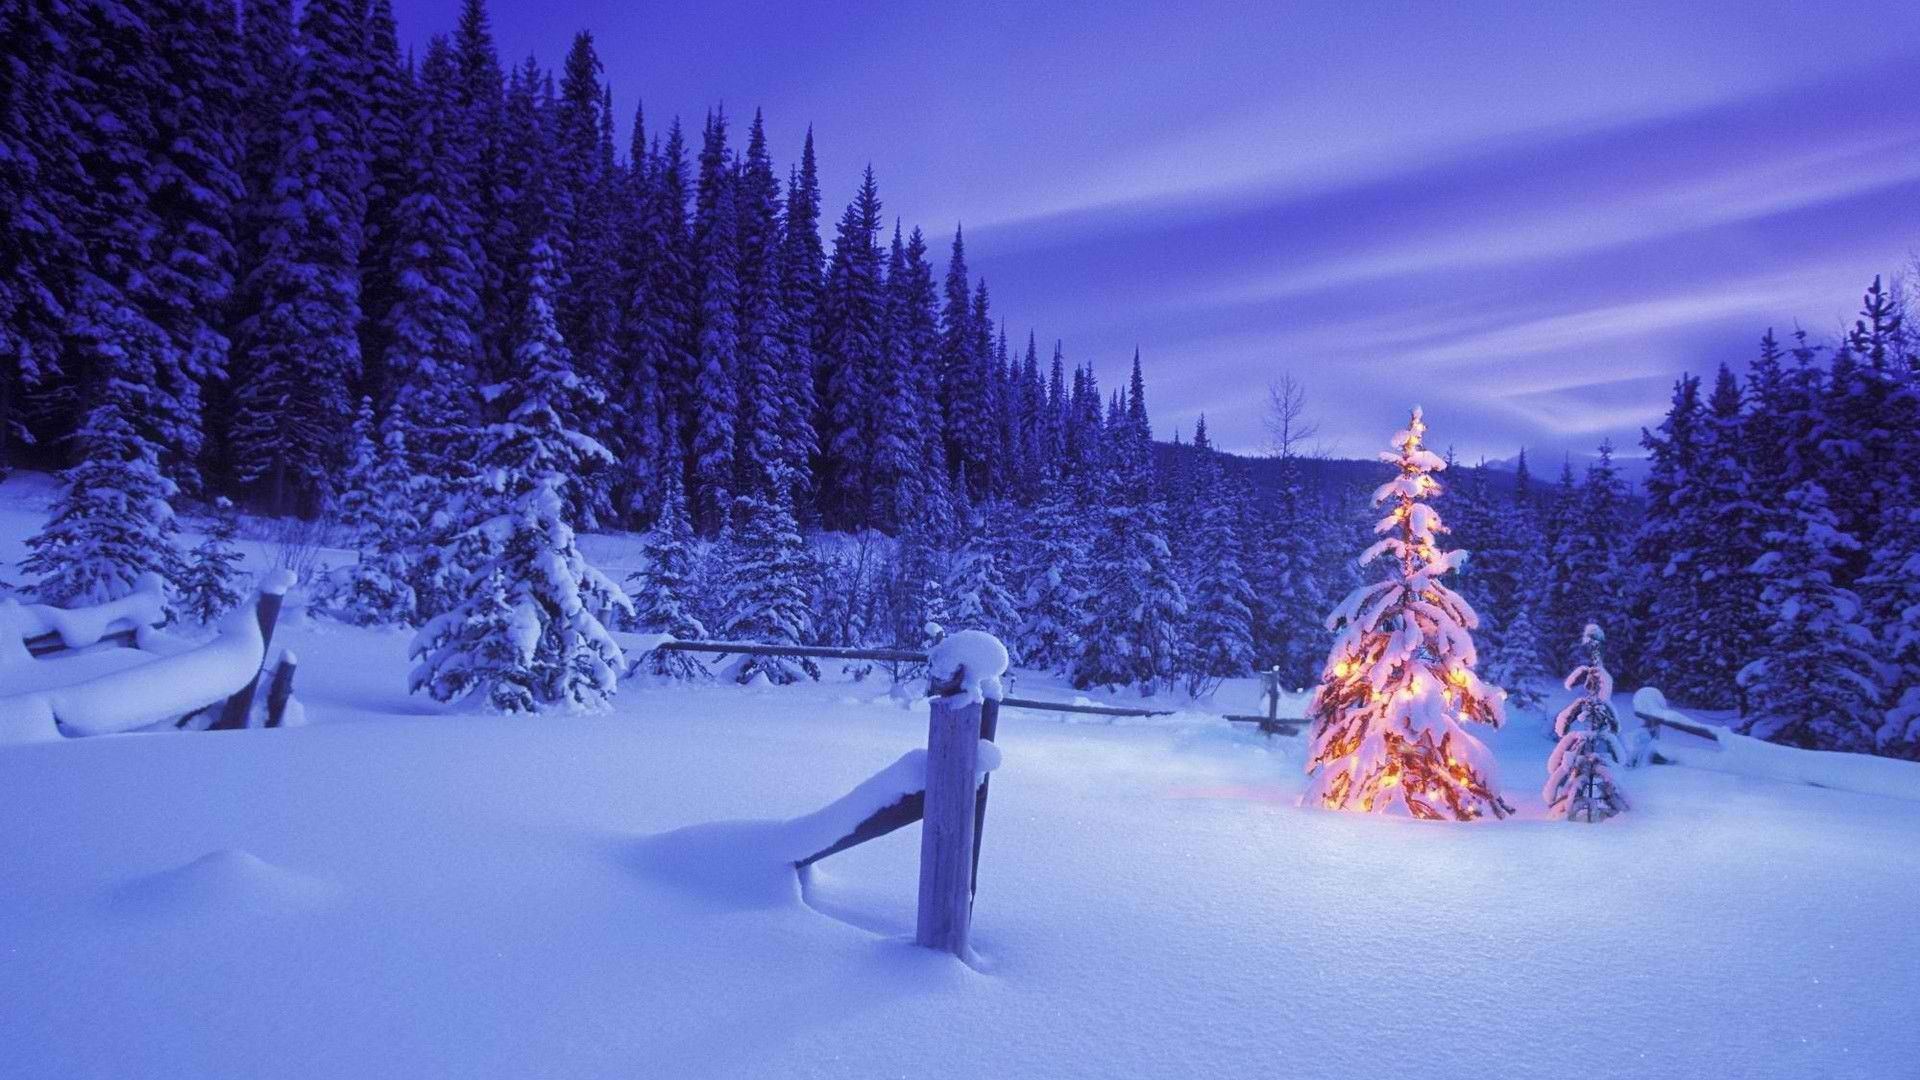 Free Christmas Wallpaper Nice Christmas Image Gzhaixier In The Forest